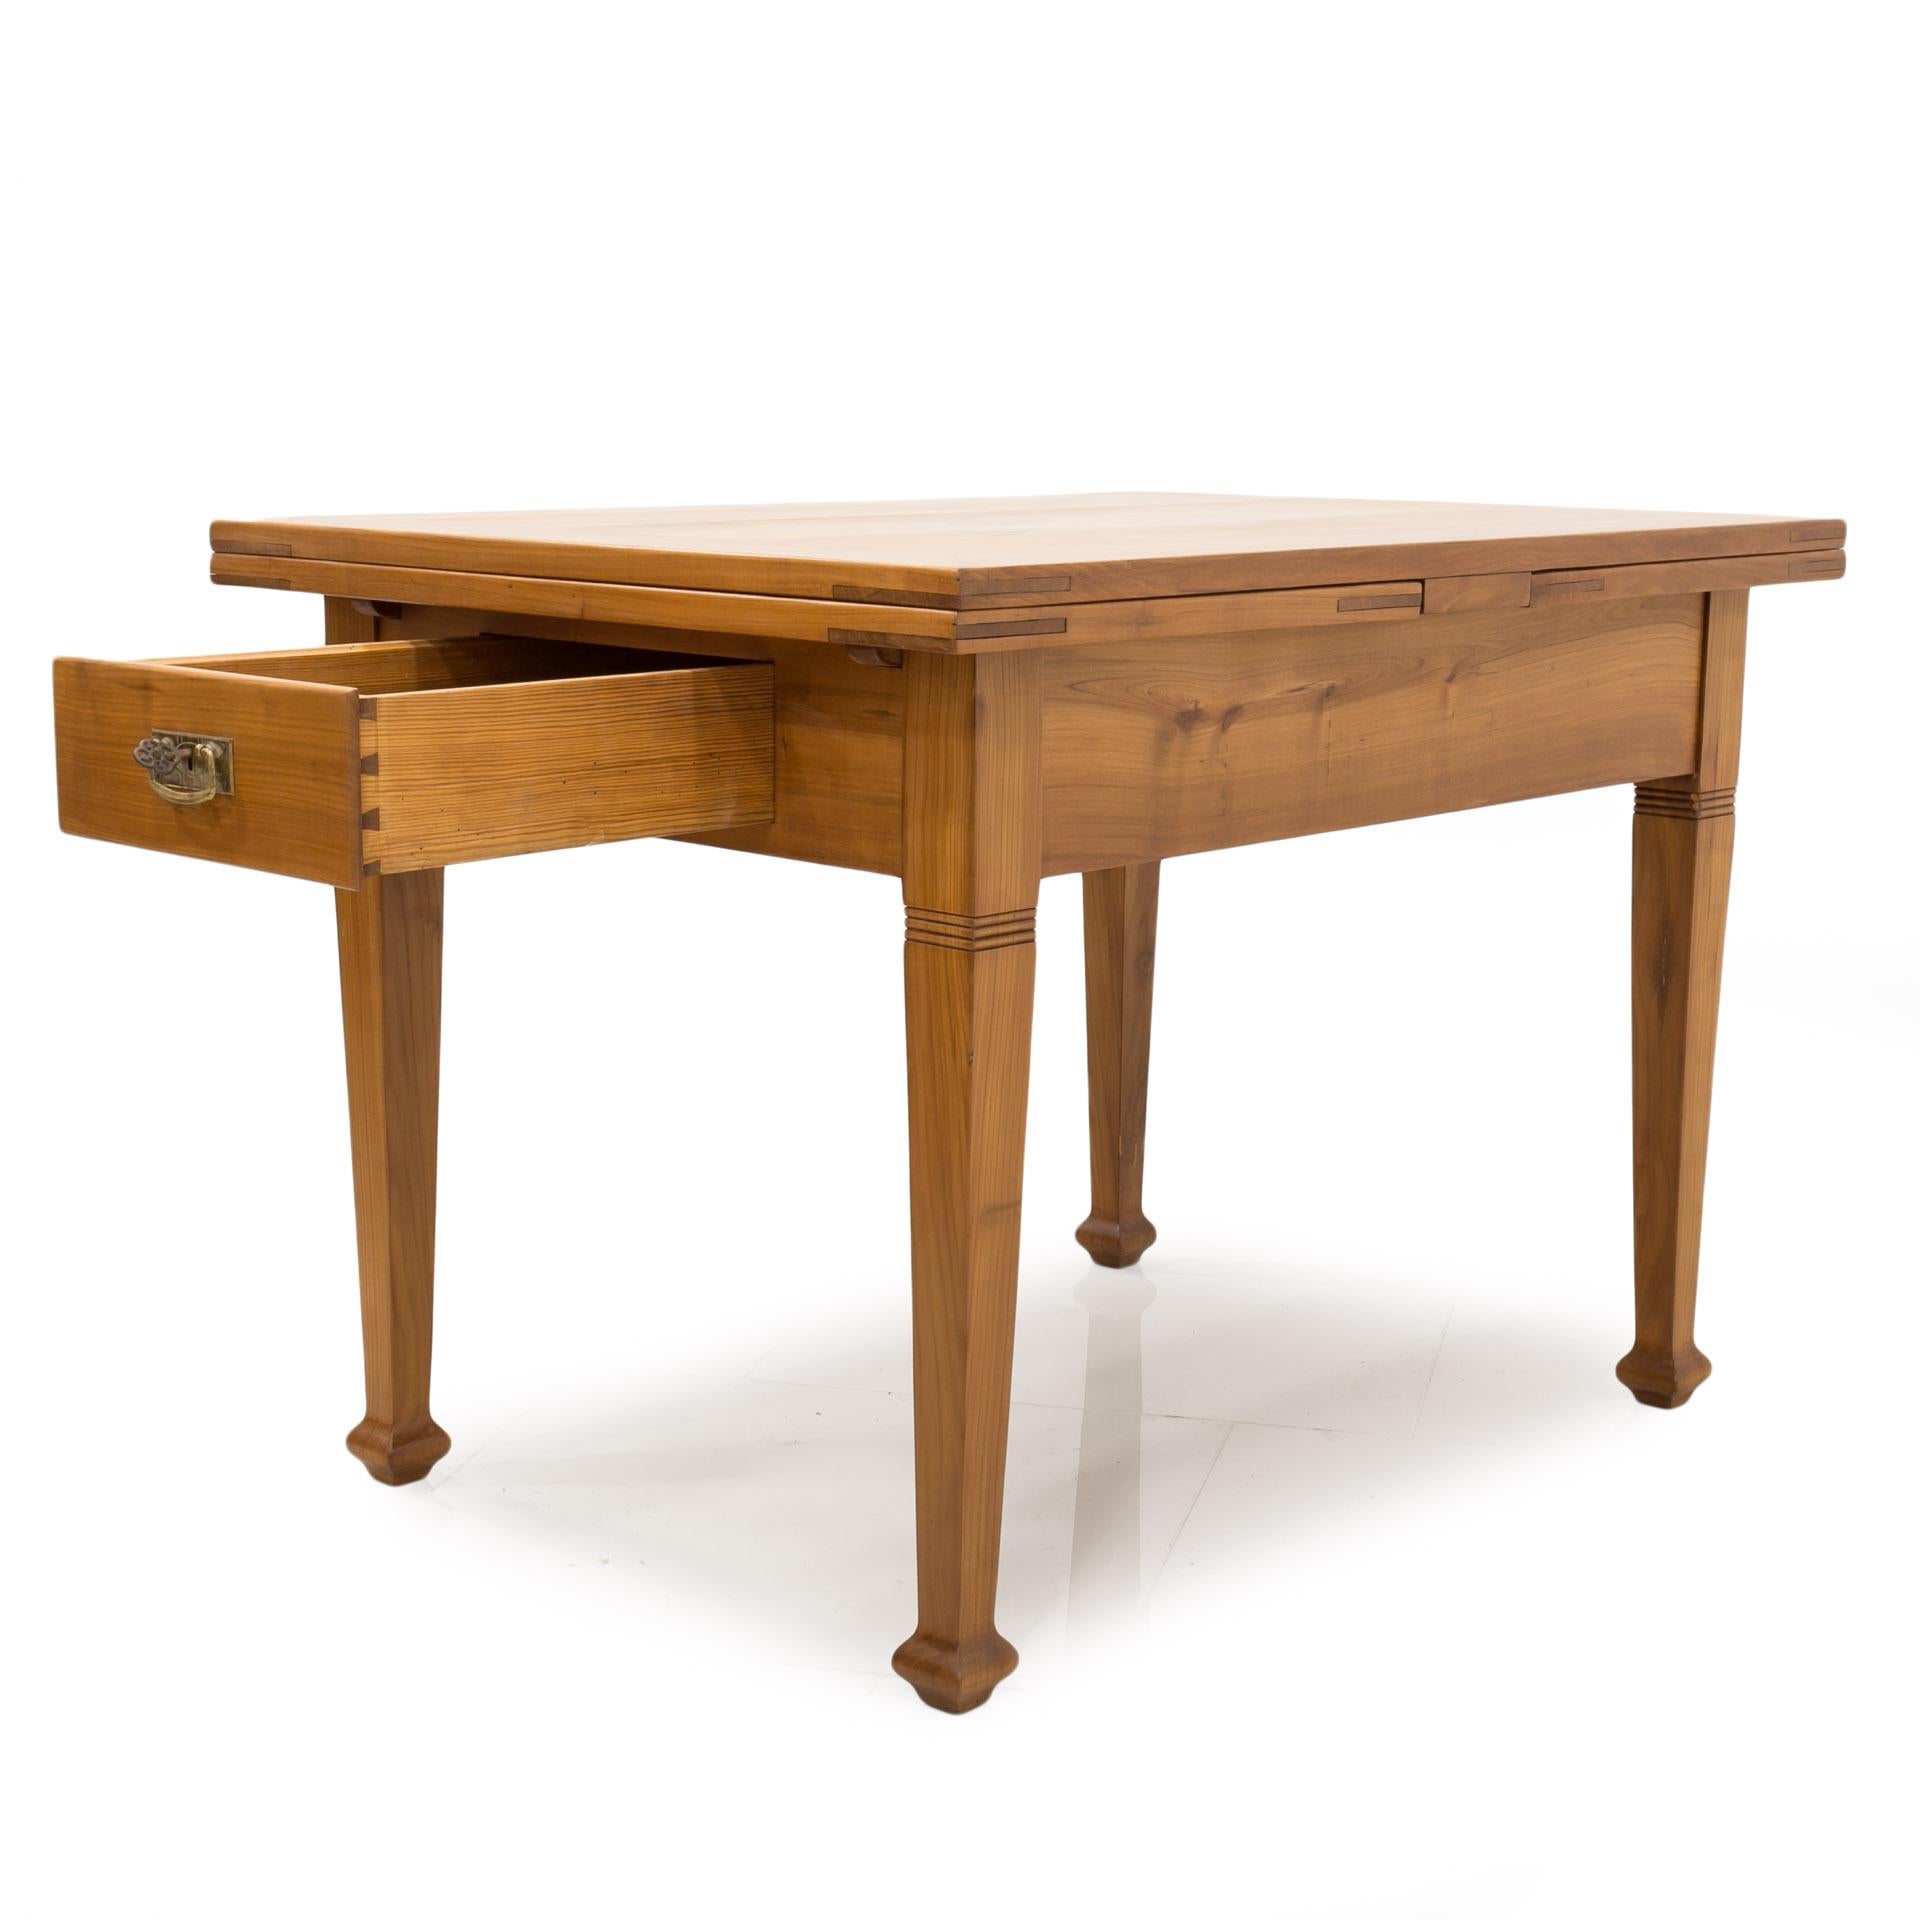 This beautiful table in Art Nouveau style comes from Germany from the beginning of 20th century. It is made of cherrywood and its surface has been gently refreshed and refinished with natural wax-oil that protects and cares for the wood. It features